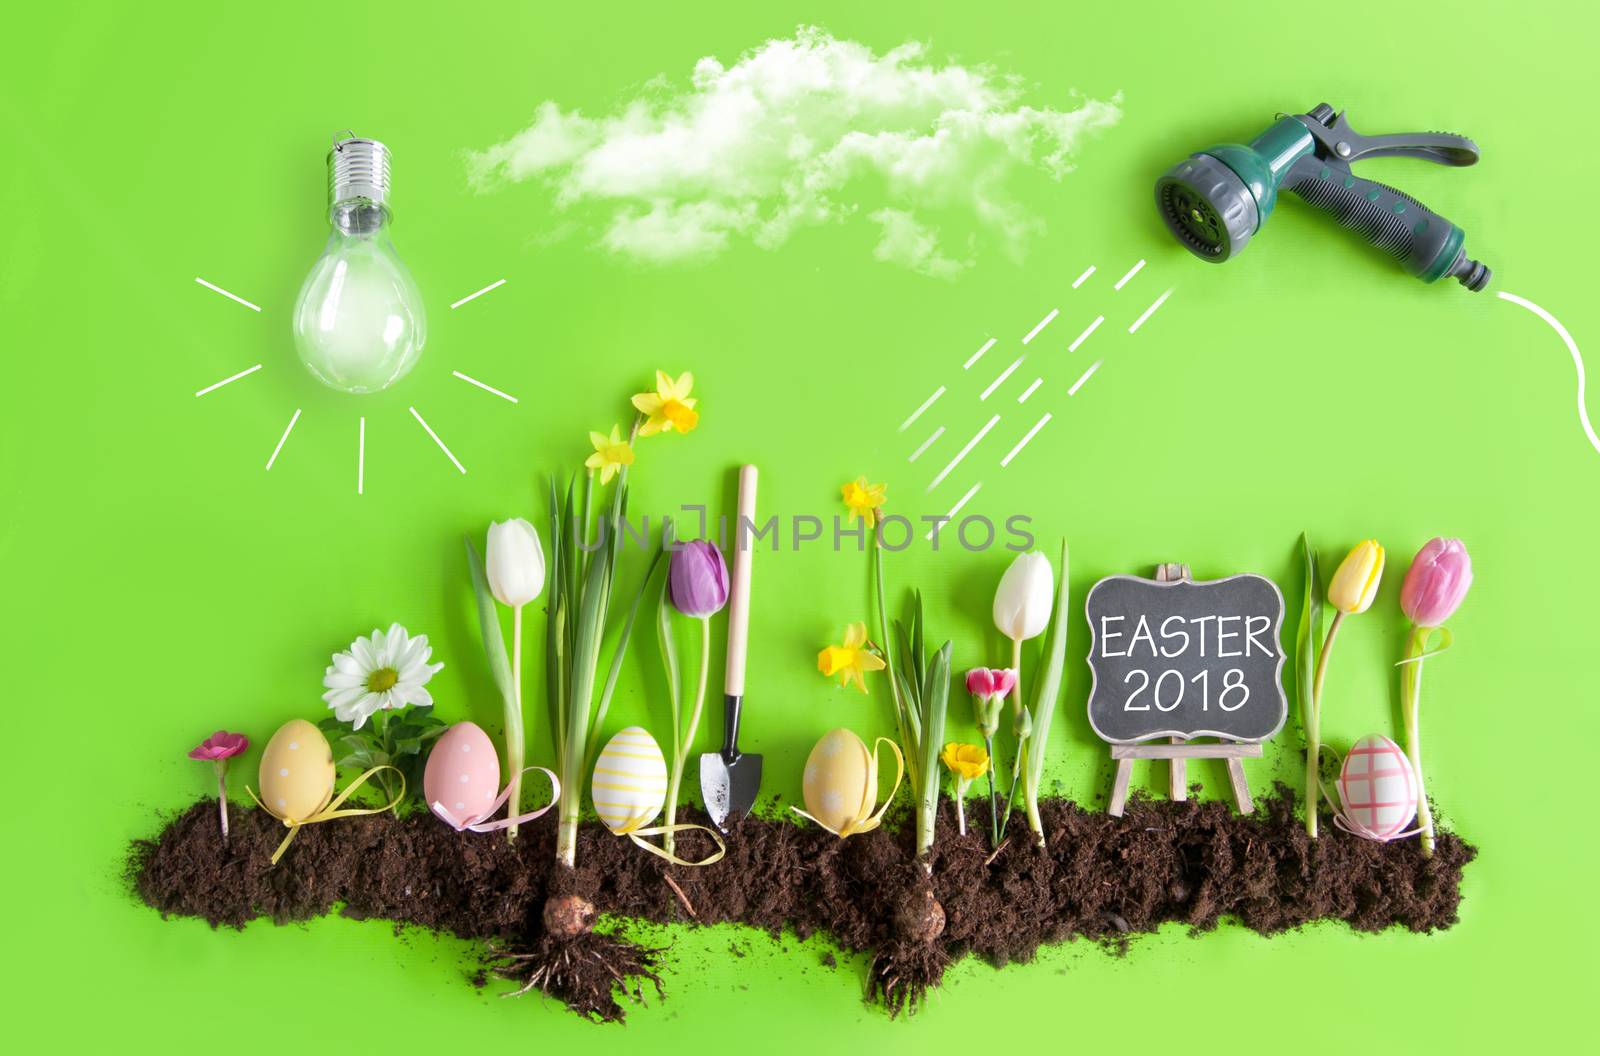 Easter flower bed garden with row of painted eggs amongst flowers, clouds, light bulb as the sun, and hose pipe with a sketch of water being sprayed 